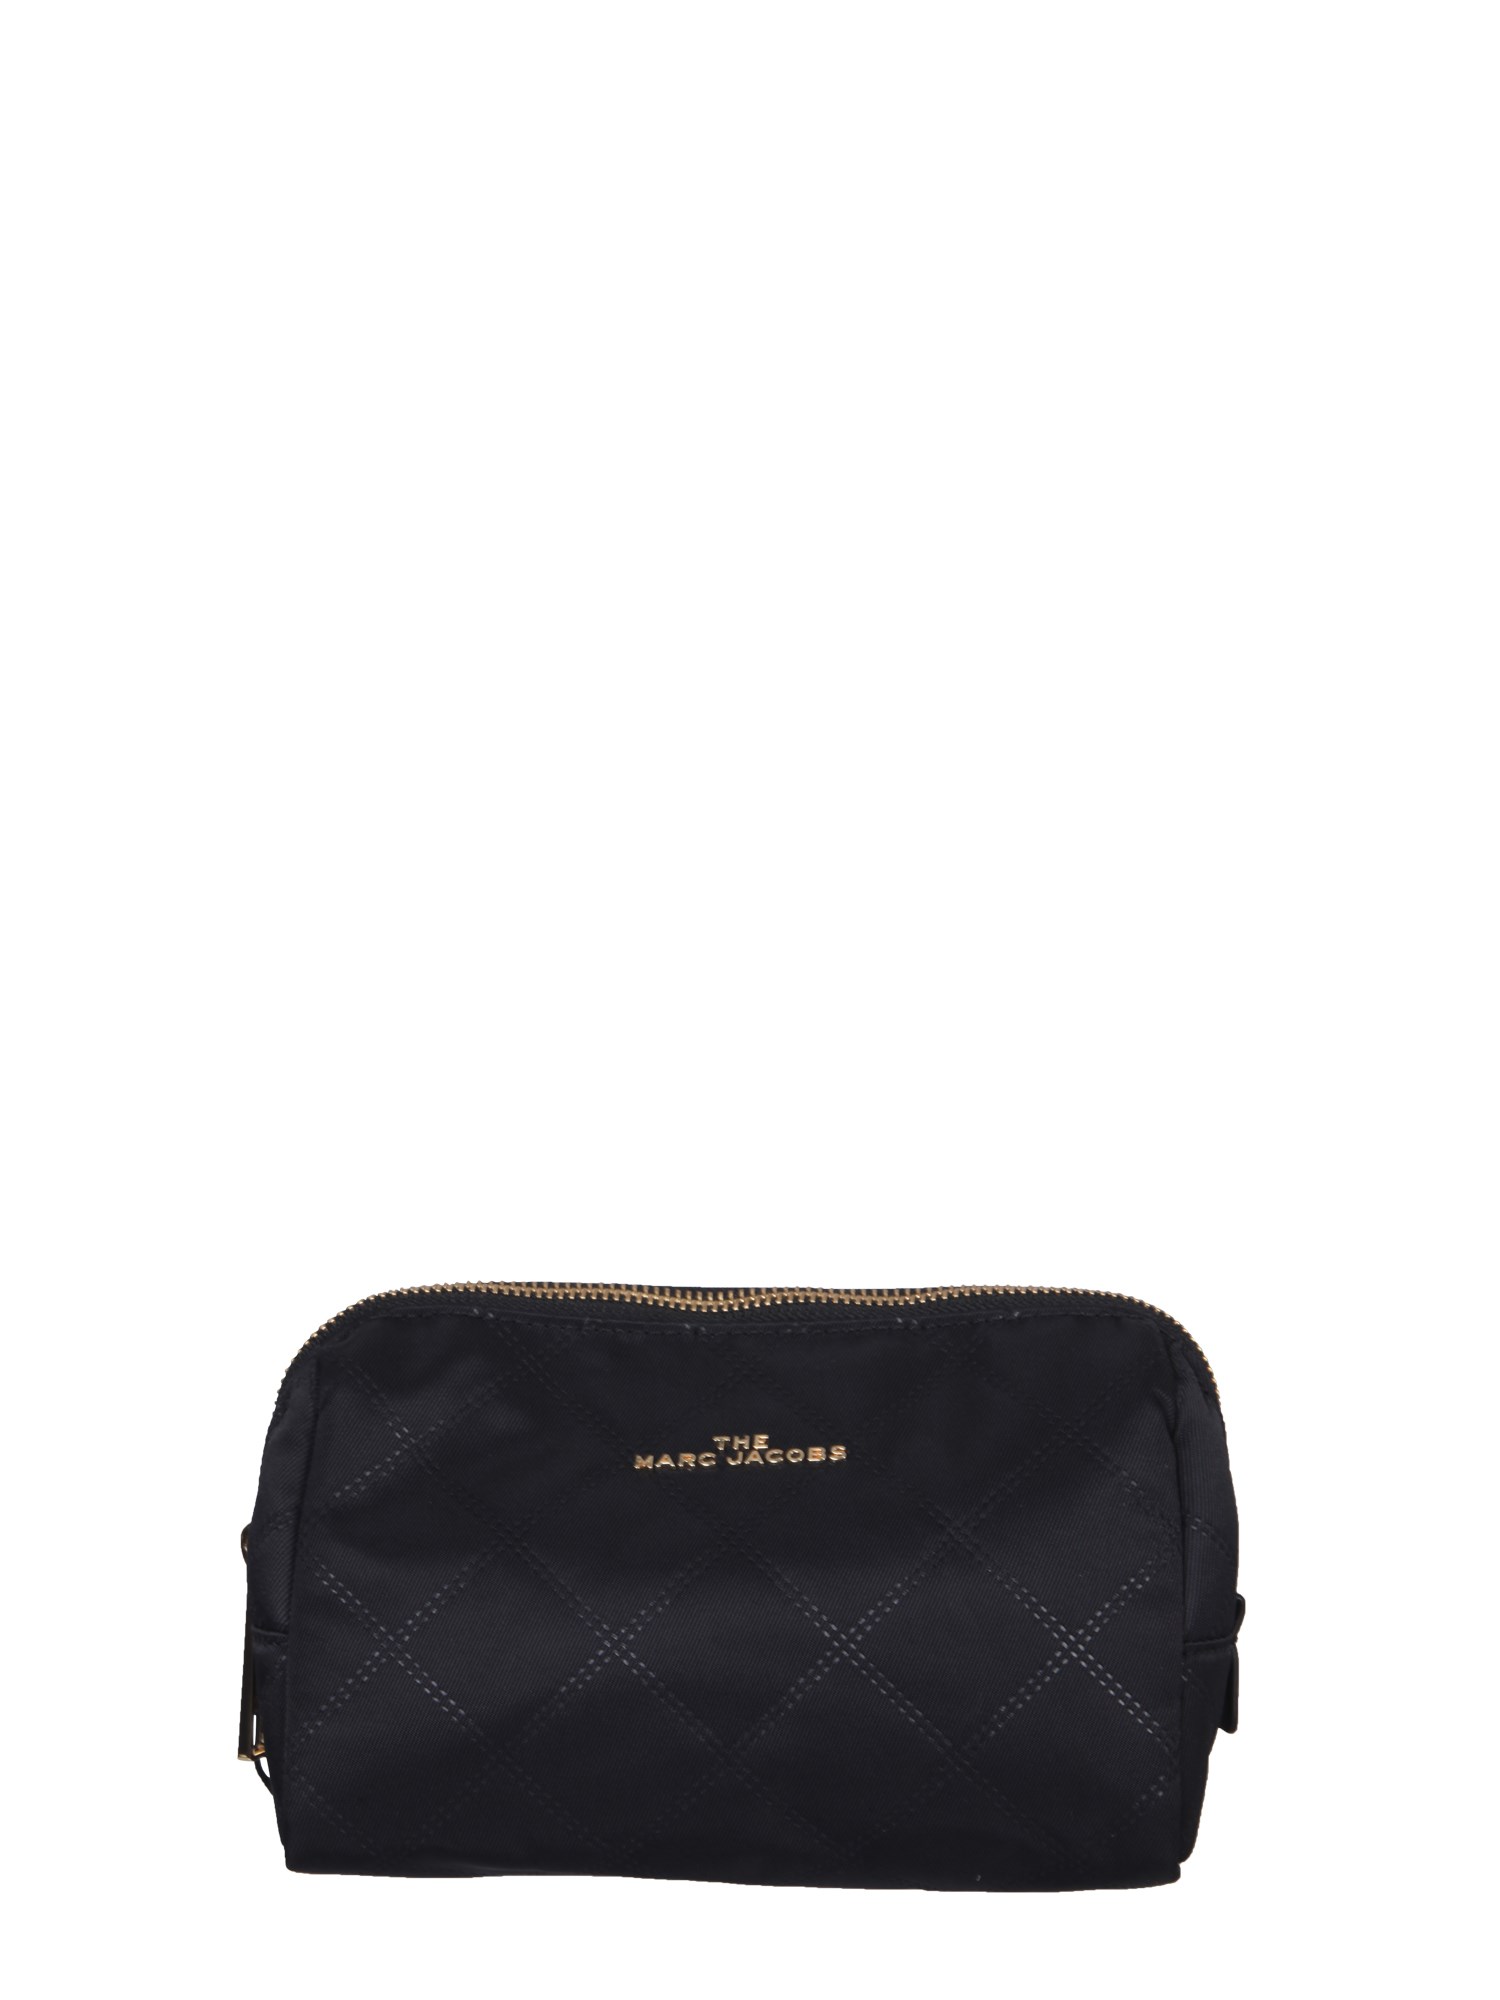 marc jacobs the beauty triangle pouch